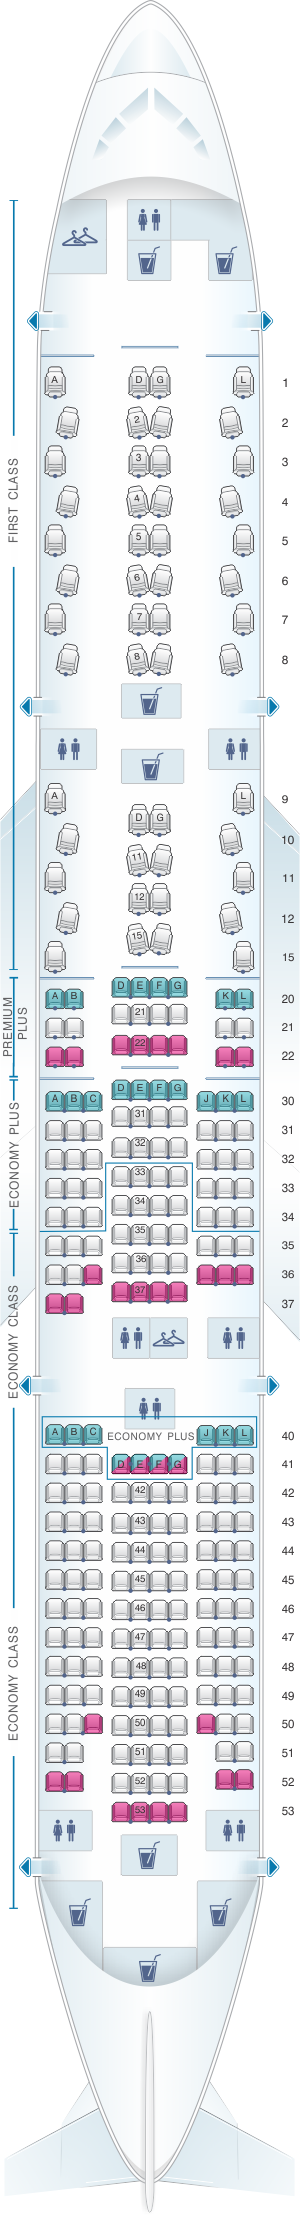 Seat map for United Airlines Boeing B777 200 (777) - version 1